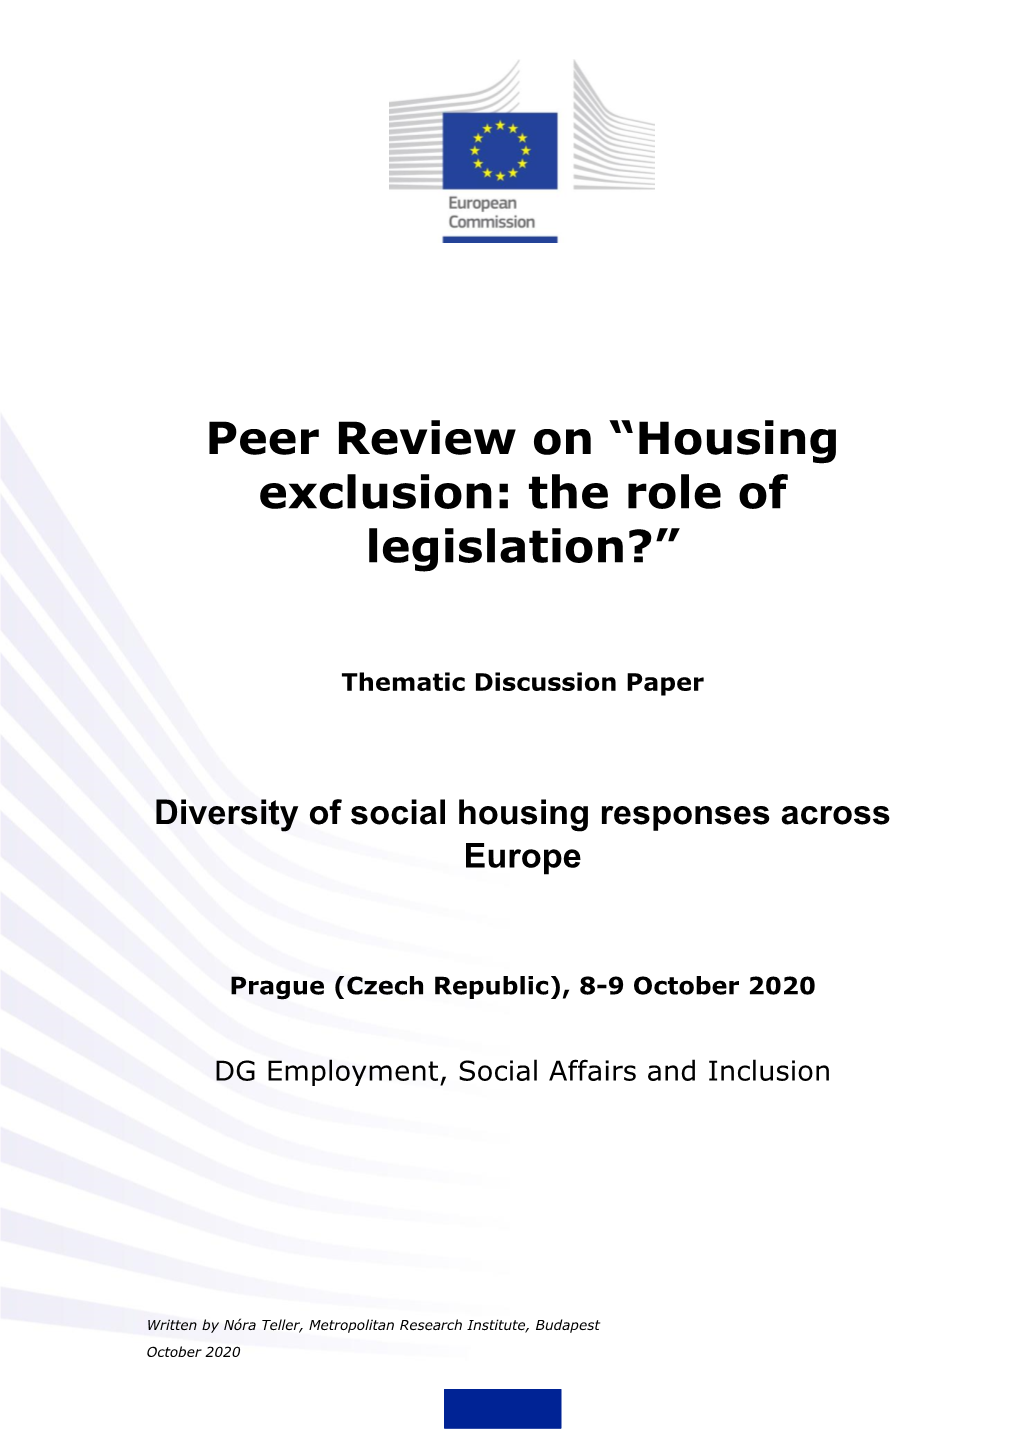 Peer Review on “Housing Exclusion: the Role of Legislation?” (2020)